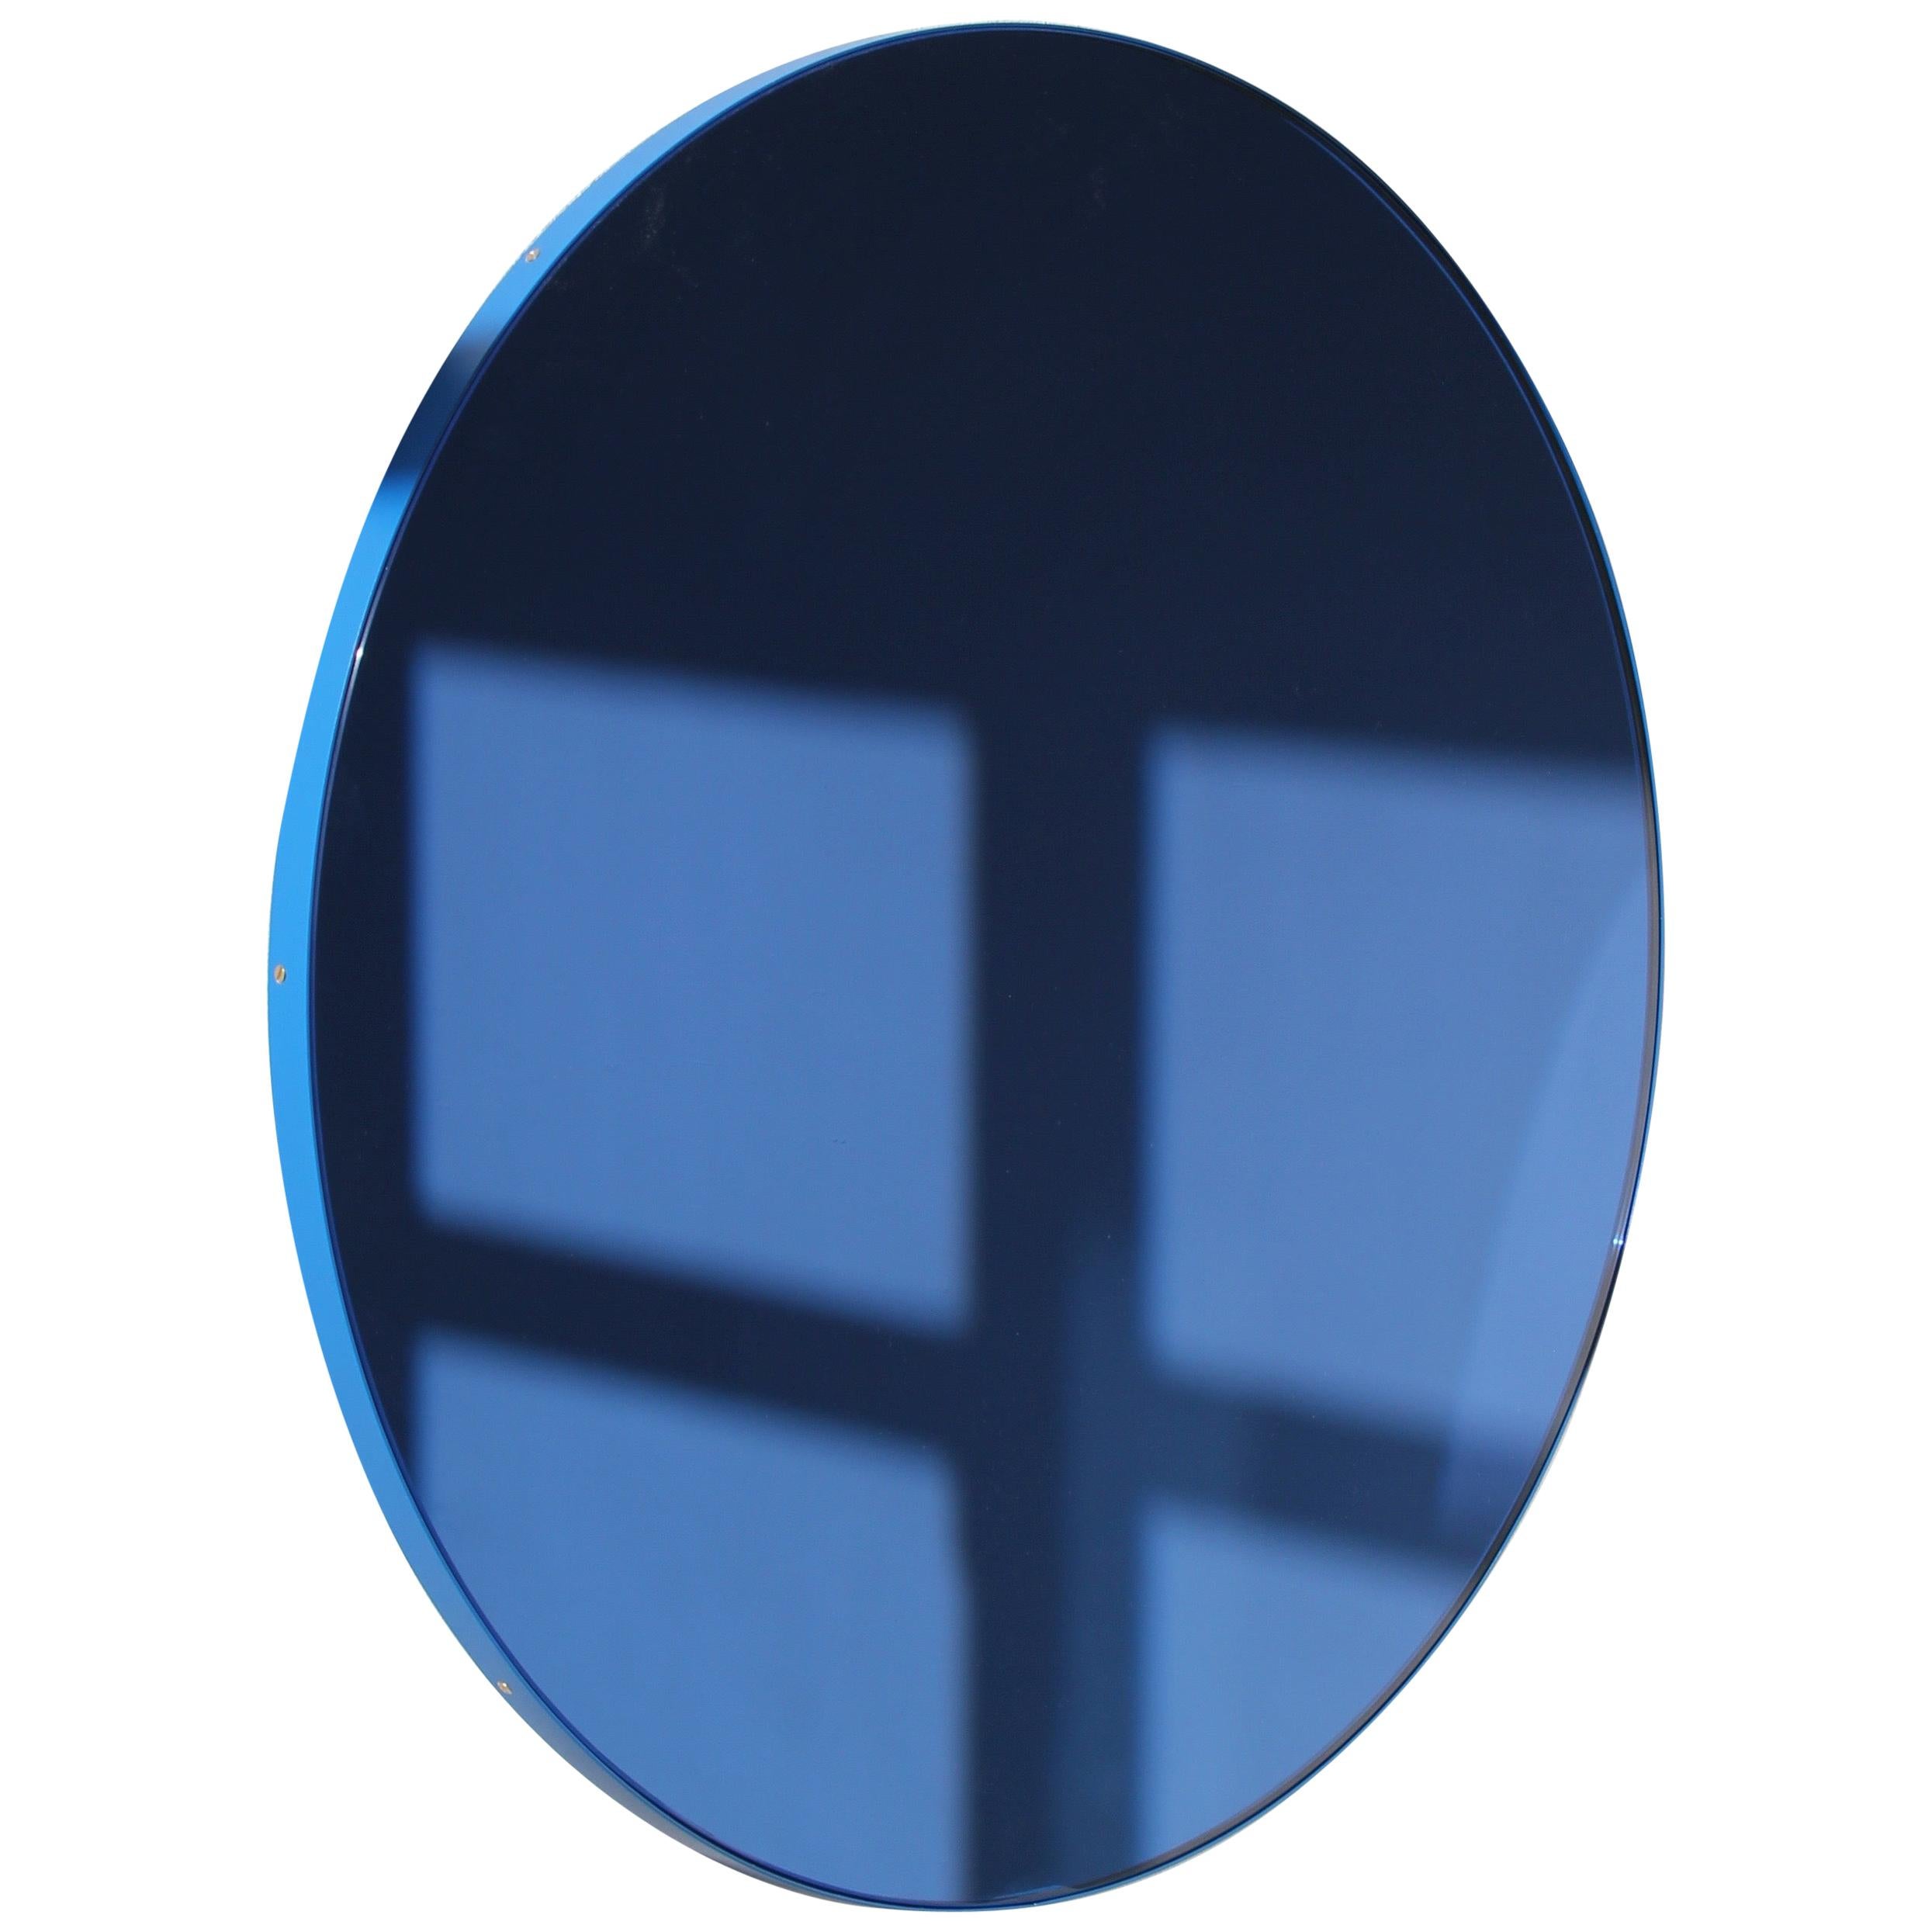 Orbis Blue Tinted Bespoke Round Mirror with a Modern Blue Frame - Small